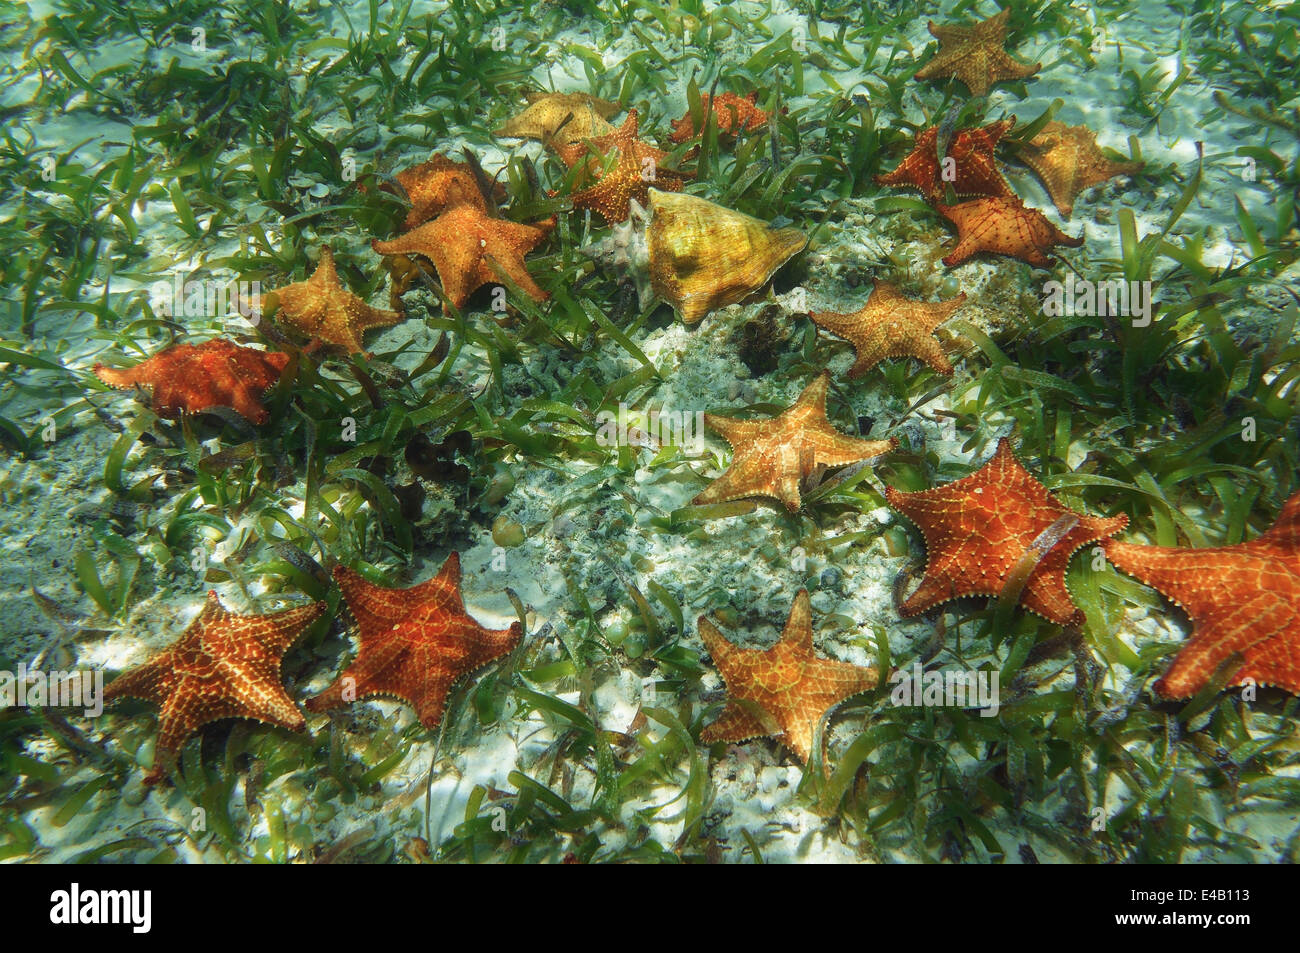 Many starfish underwater with a queen conch shell, Caribbean sea Stock Photo